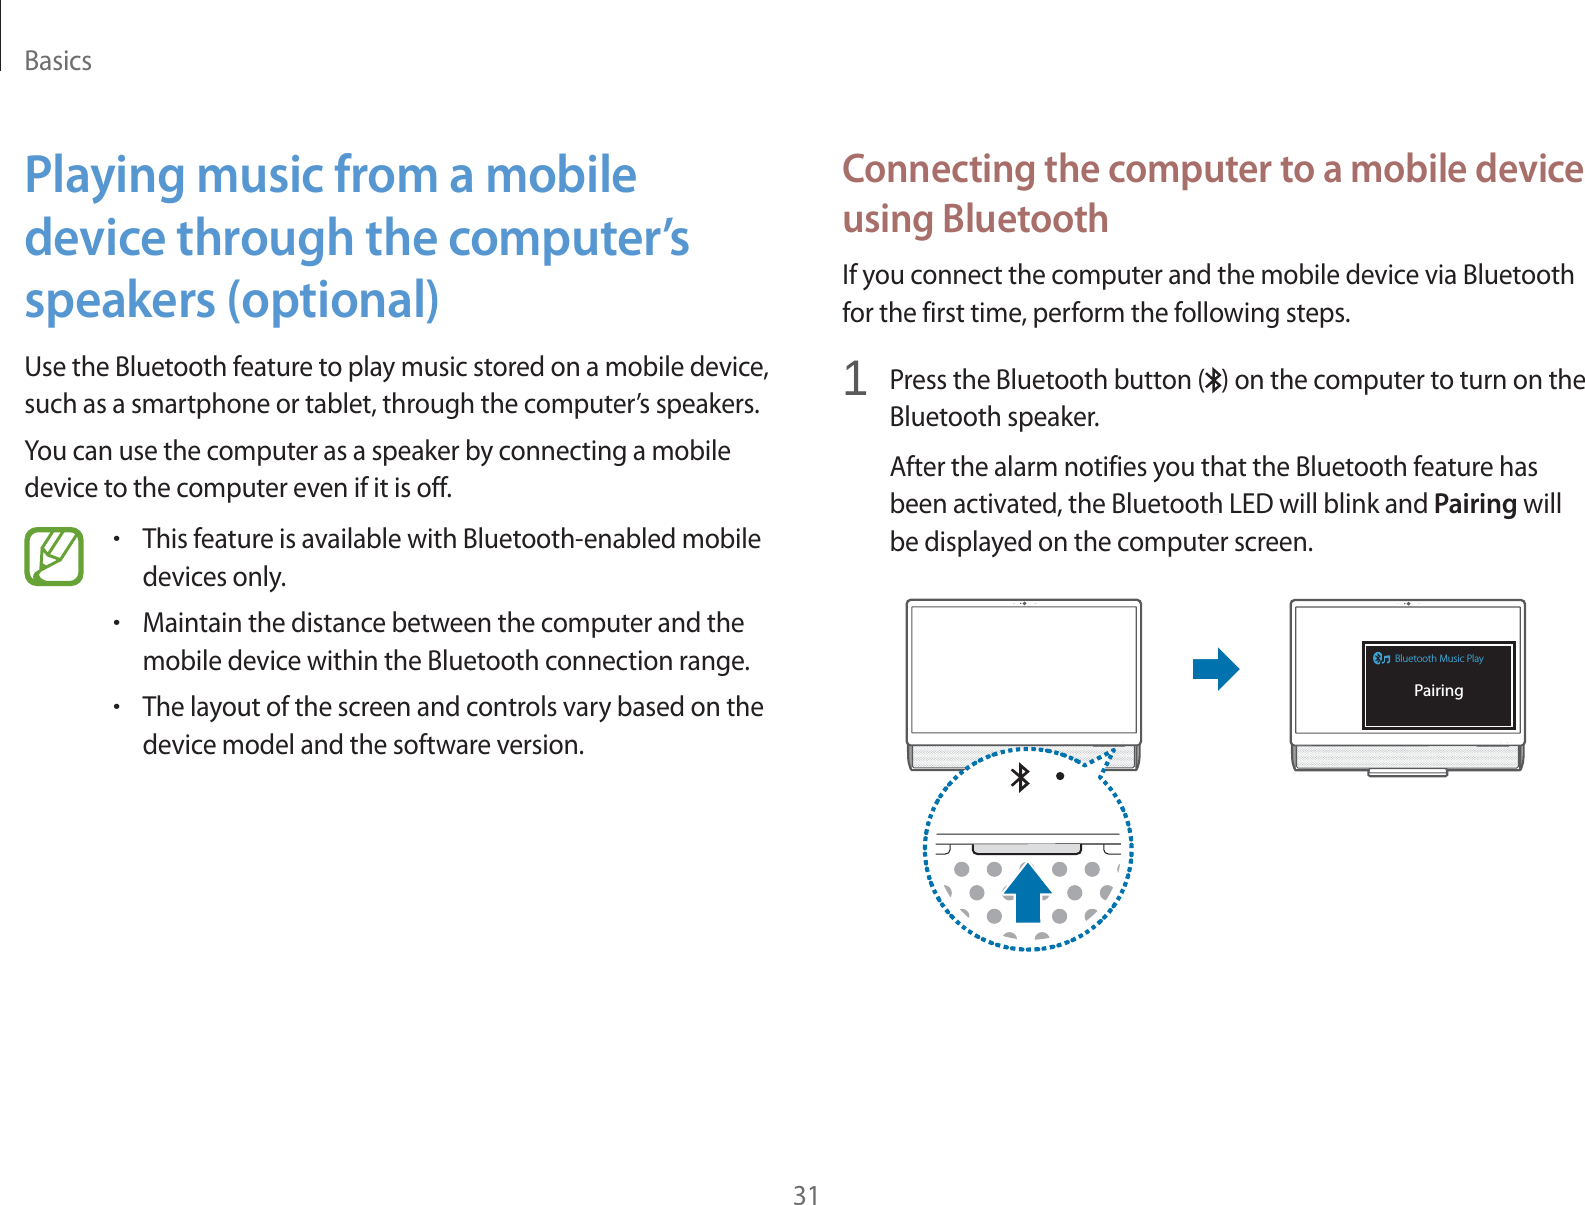 Basics31Connecting the computer to a mobile device using BluetoothIf you connect the computer and the mobile device via Bluetooth for the first time, perform the following steps.1Press the Bluetooth button ( ) on the computer to turn on the Bluetooth speaker.After the alarm notifies you that the Bluetooth feature has been activated, the Bluetooth LED will blink and Pairing will be displayed on the computer screen.Bluetooth Music PlayPairingPlaying music from a mobile device through the computer’s speakers (optional)Use the Bluetooth feature to play music stored on a mobile device, such as a smartphone or tablet, through the computer’s speakers.You can use the computer as a speaker by connecting a mobile device to the computer even if it is off.rThis feature is available with Bluetooth-enabled mobile devices only.rMaintain the distance between the computer and the mobile device within the Bluetooth connection range.rThe layout of the screen and controls vary based on the device model and the software version.